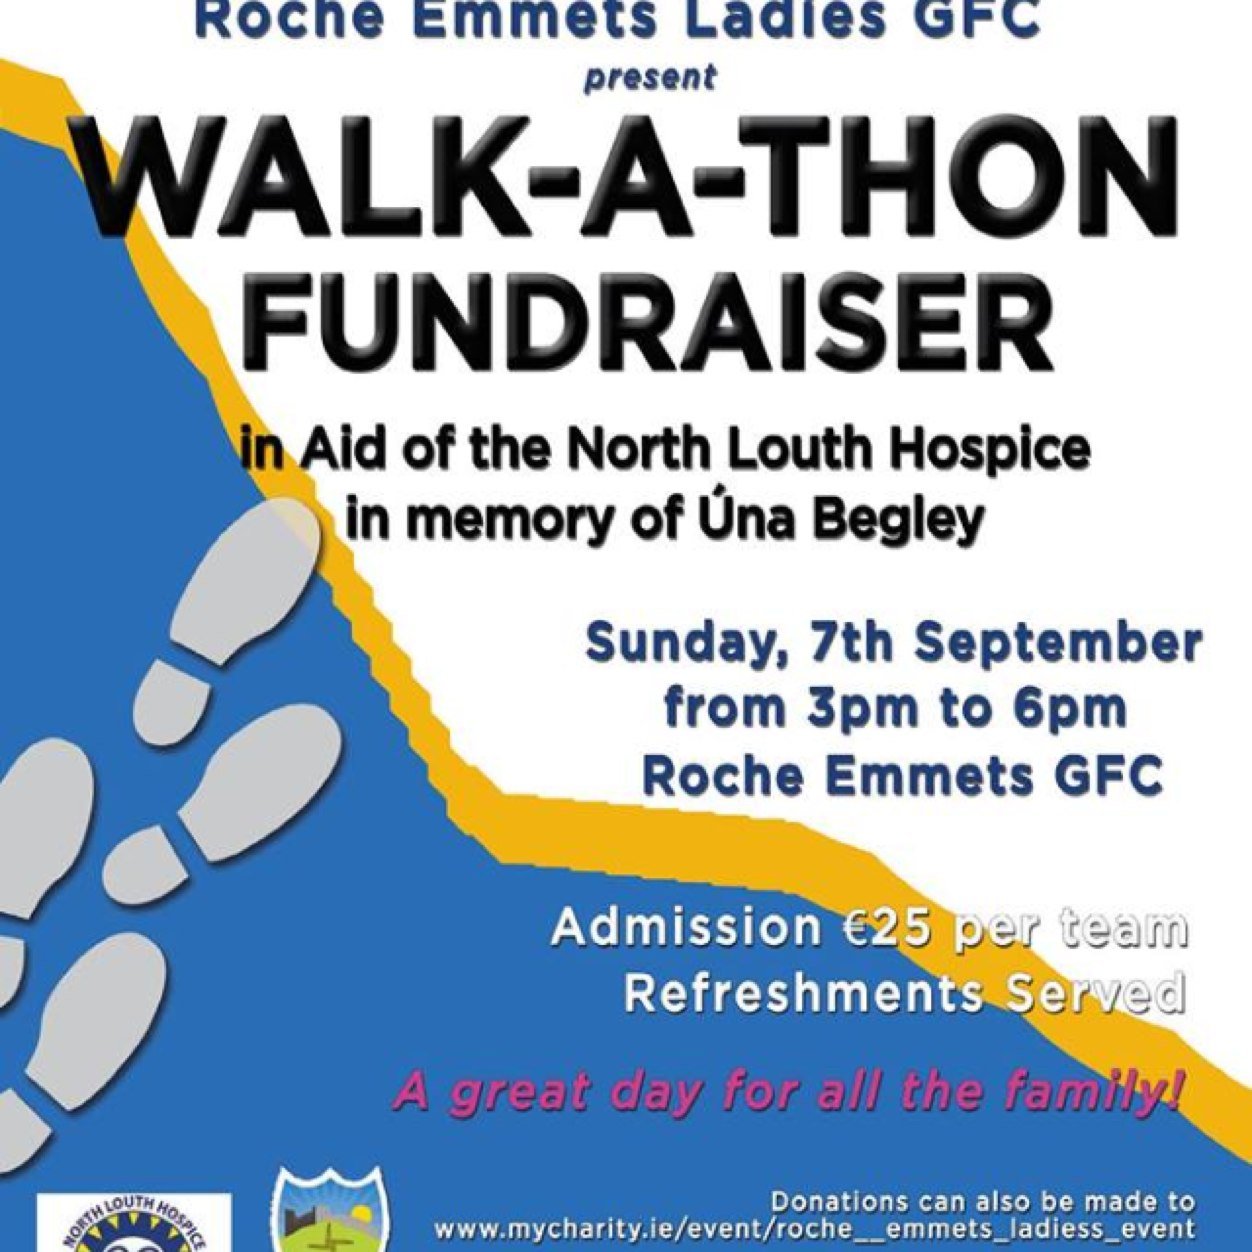 Walkathon in memory of Una Begley, Sept 7th 3-6pm in Roche Emmets In aid of North Louth Hospice BBQ & lots of refreshments on the day Great family day out!